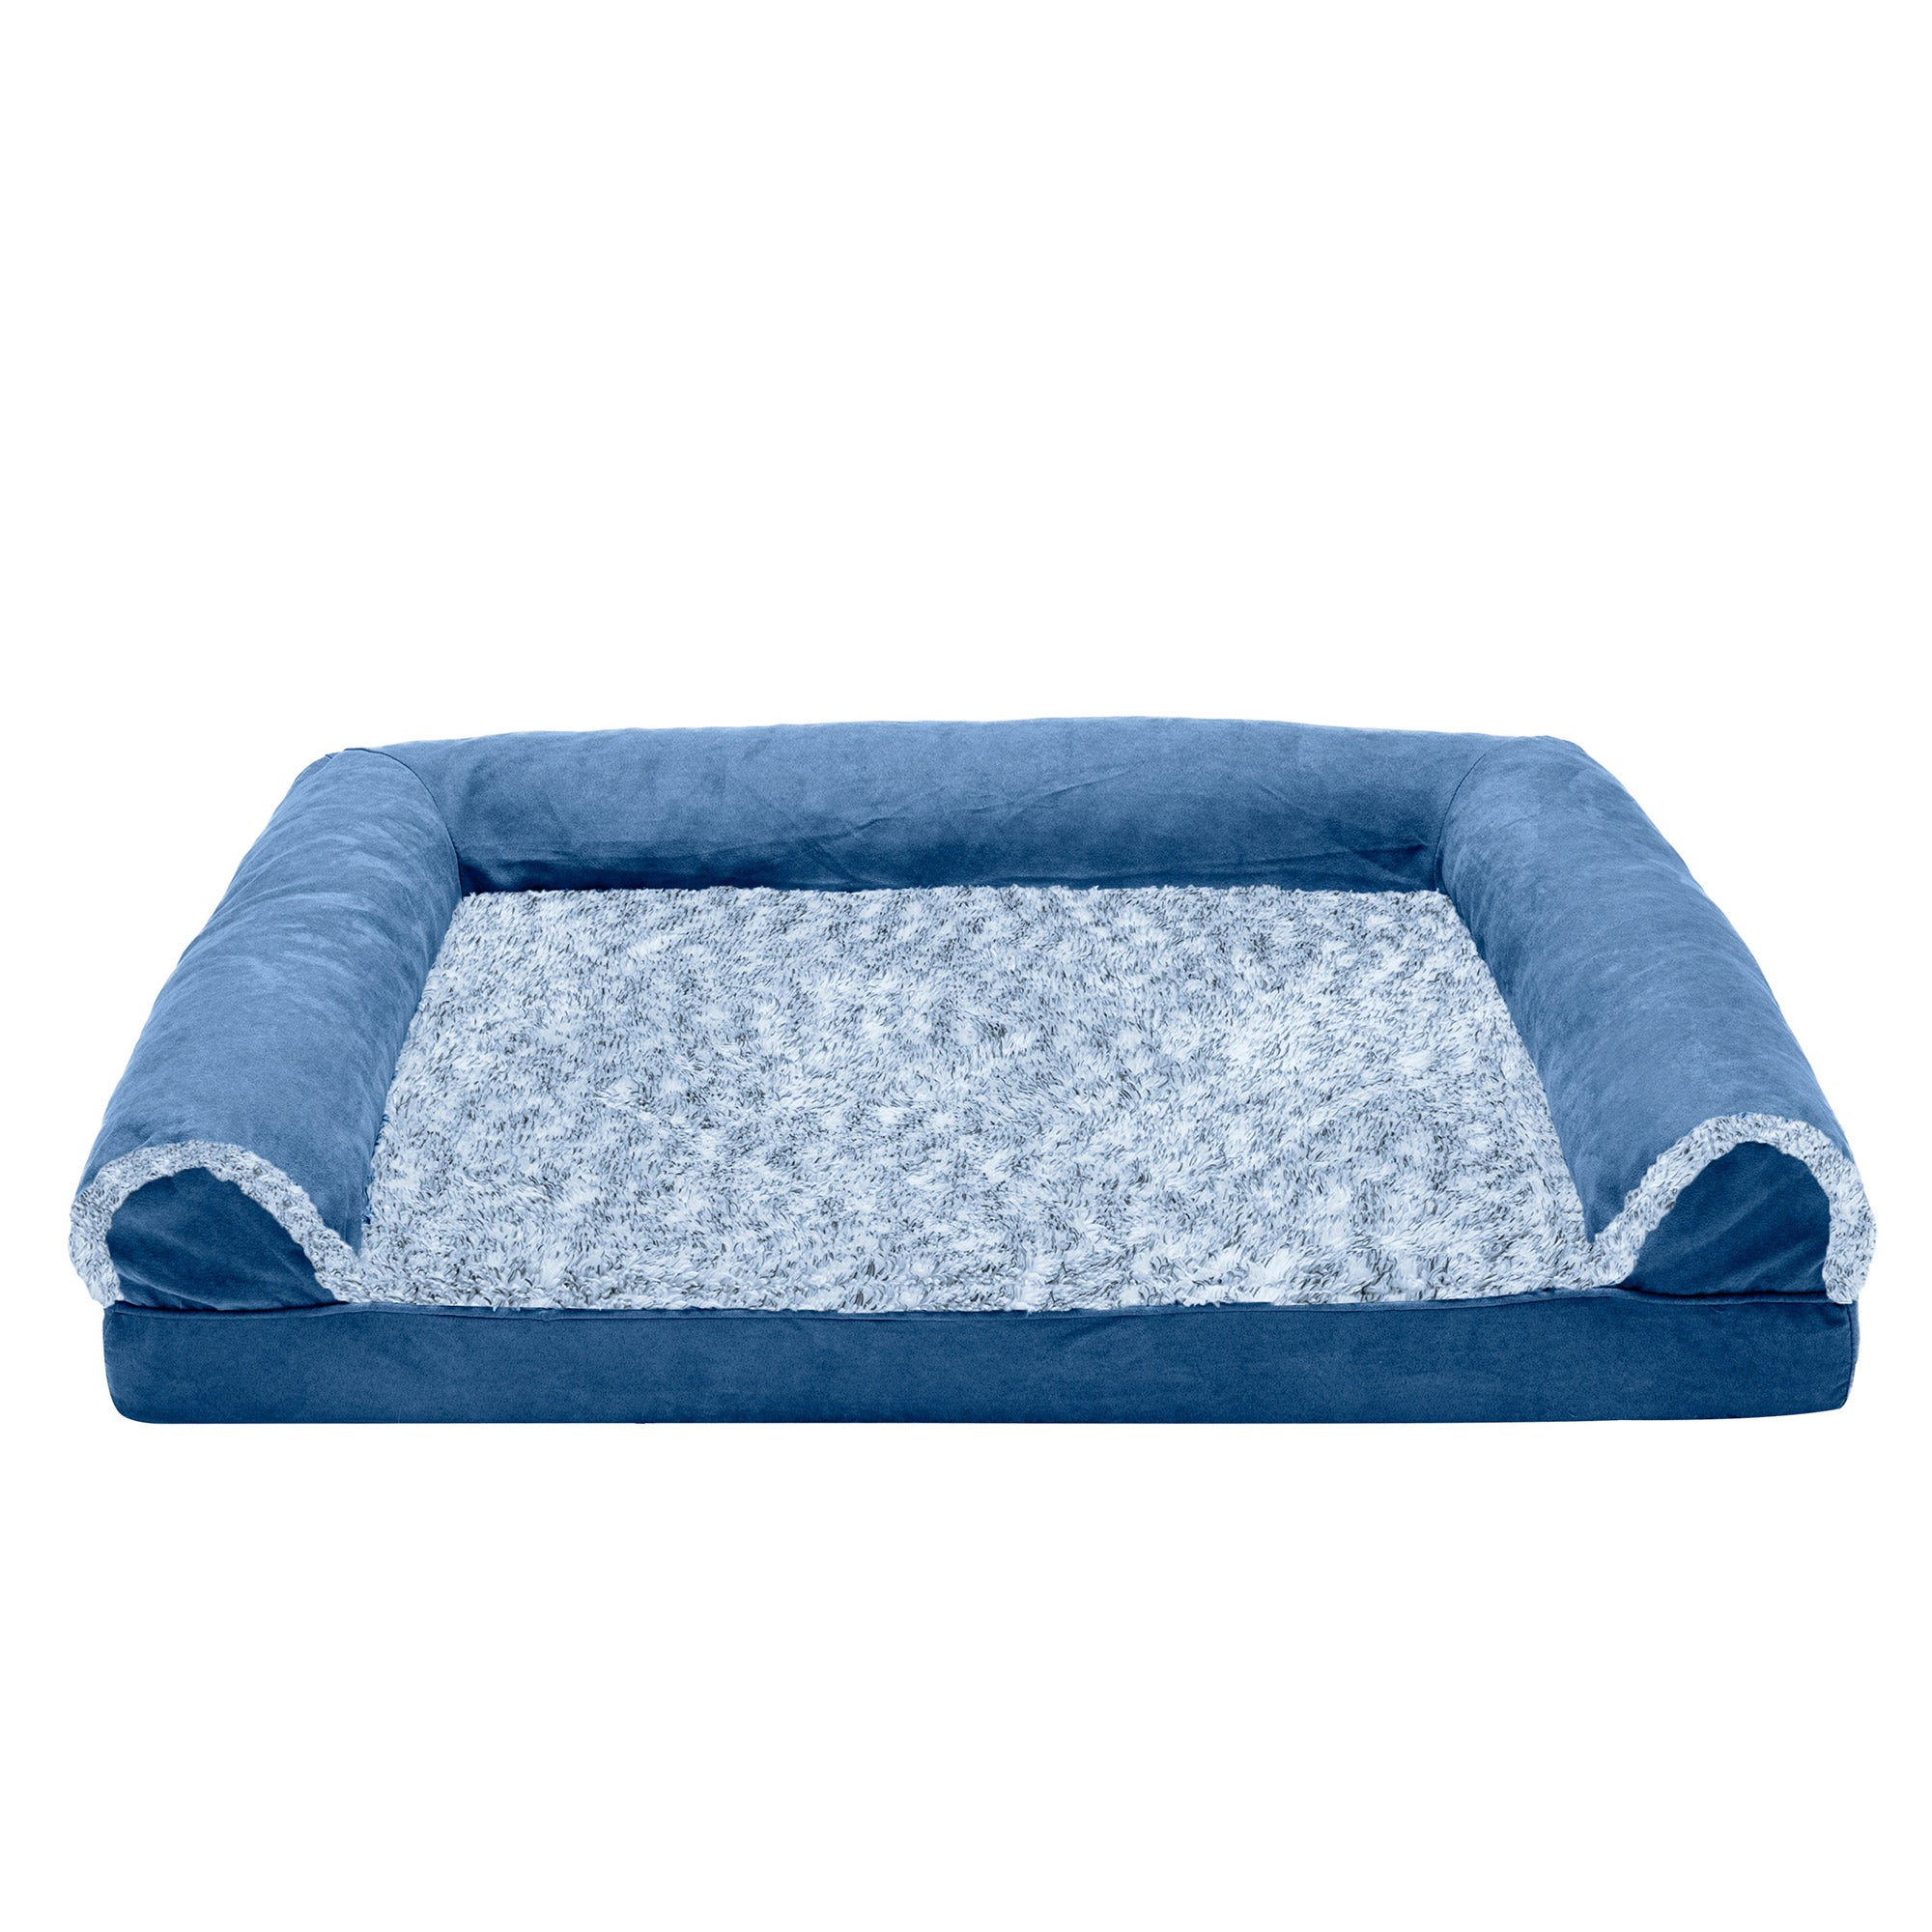 FurHaven Pet Dog Bed | Orthopedic Two-Tone Faux Fur and Suede Sofa-Style Couch Pet Bed for Dogs and Cats， Marine Blue， Large